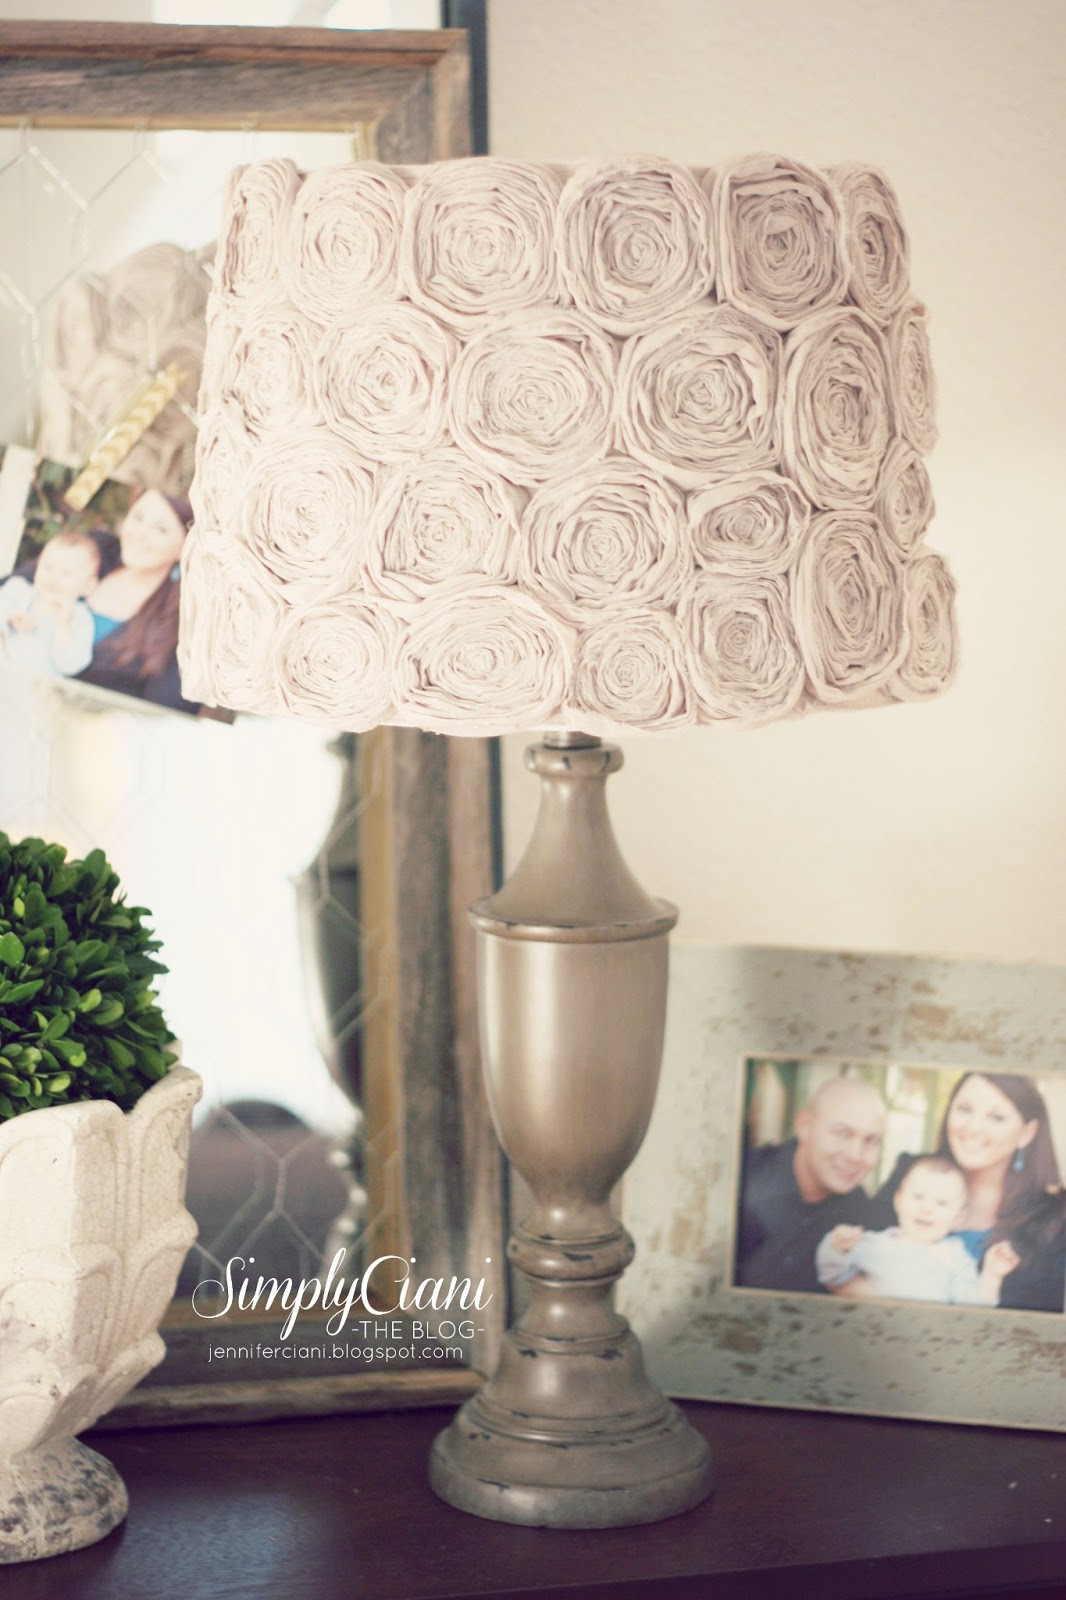 Best ideas about Shabby Chic Diy . Save or Pin Diy Shabby Chic Rosette Lamp Shade Now.